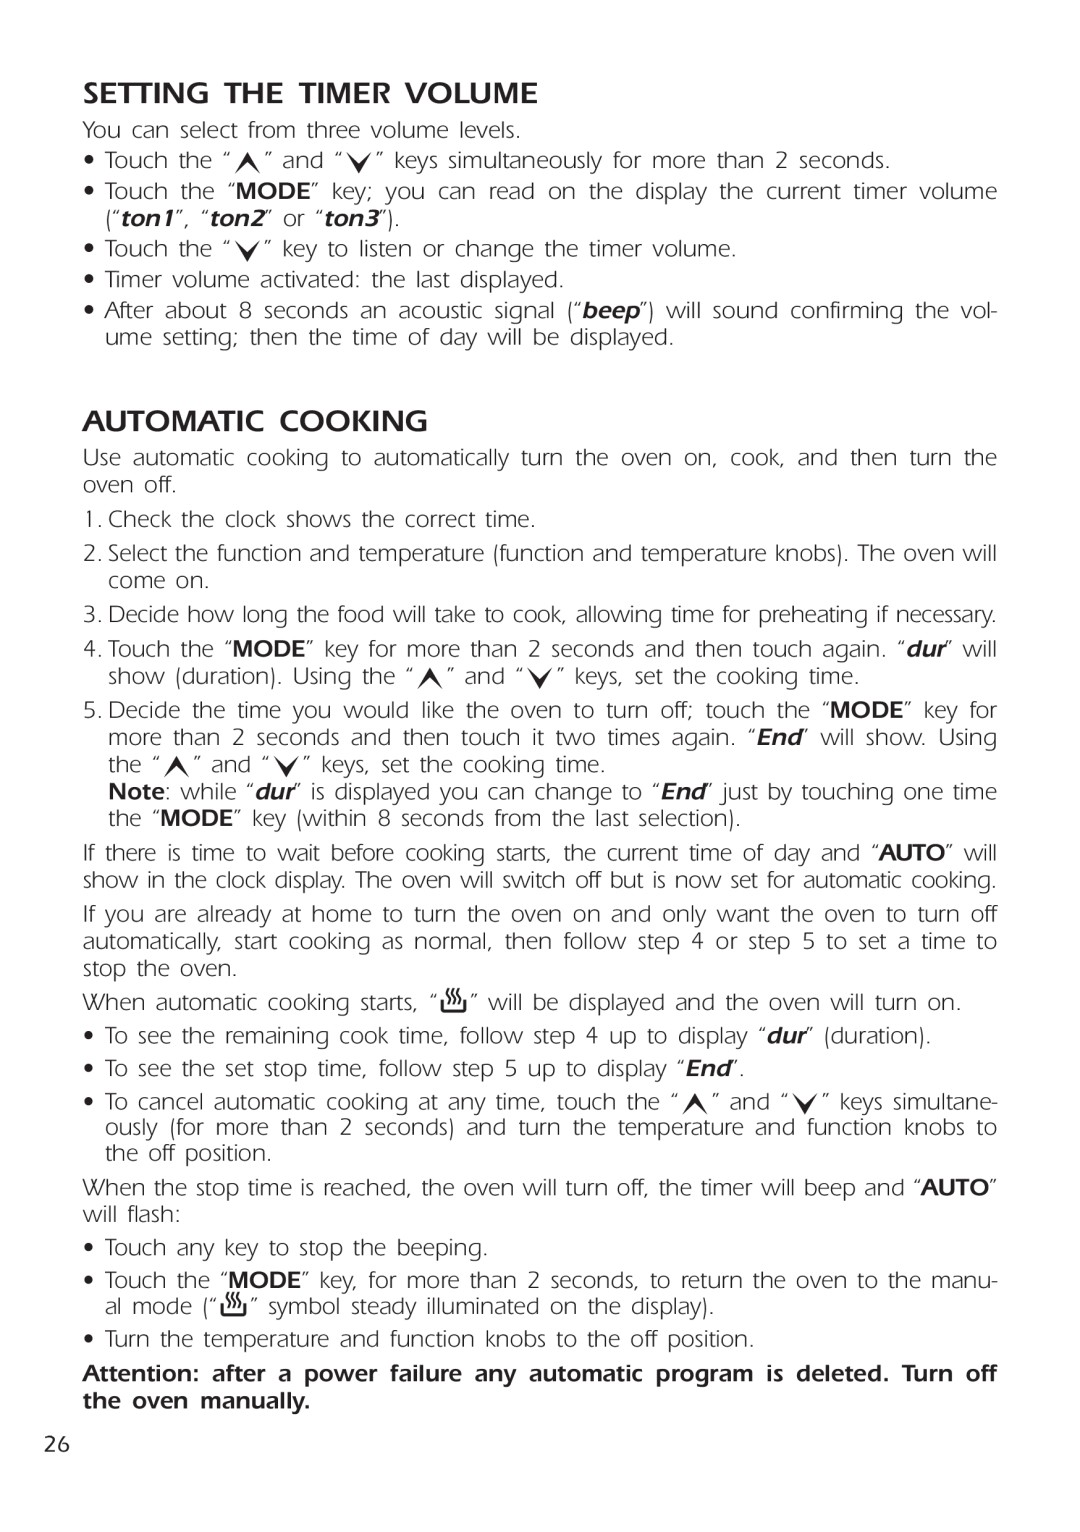 DeLonghi DE 91 MPS manual Setting The Timer Volume, Automatic Cooking 